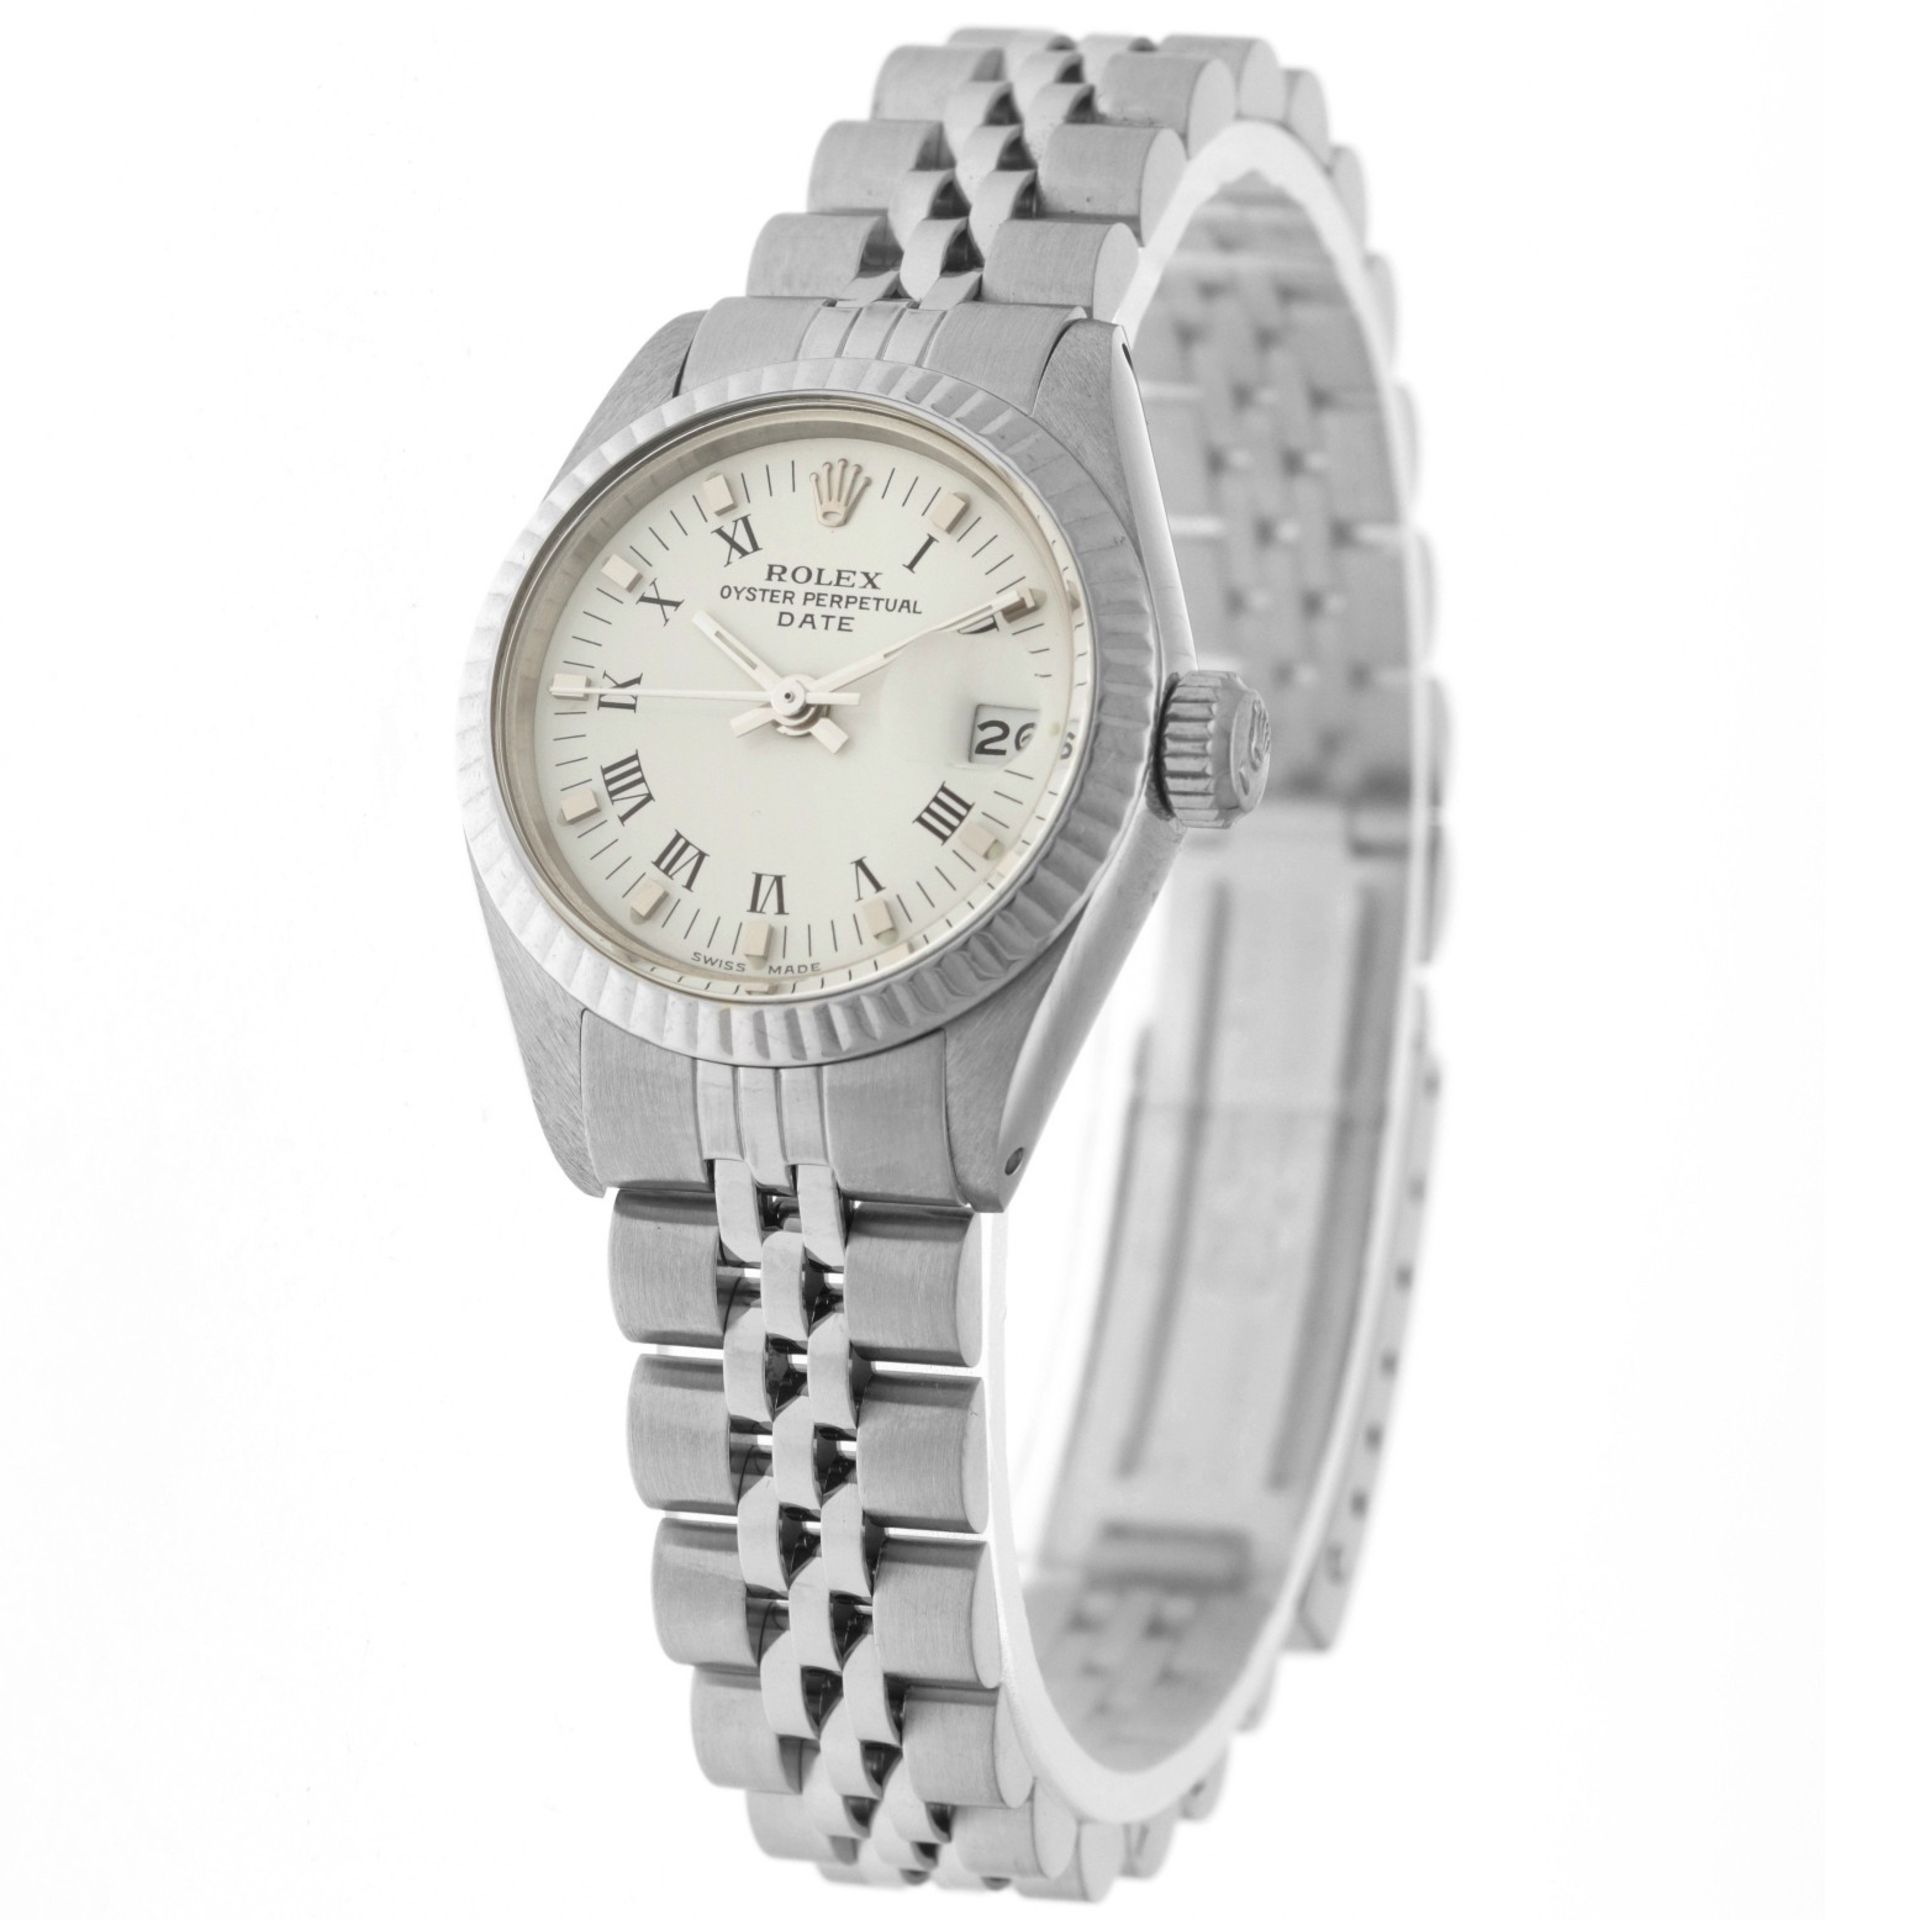 No Reserve - Rolex Lady Date 6917 - Ladies watch - approx. 1974. - Image 2 of 5